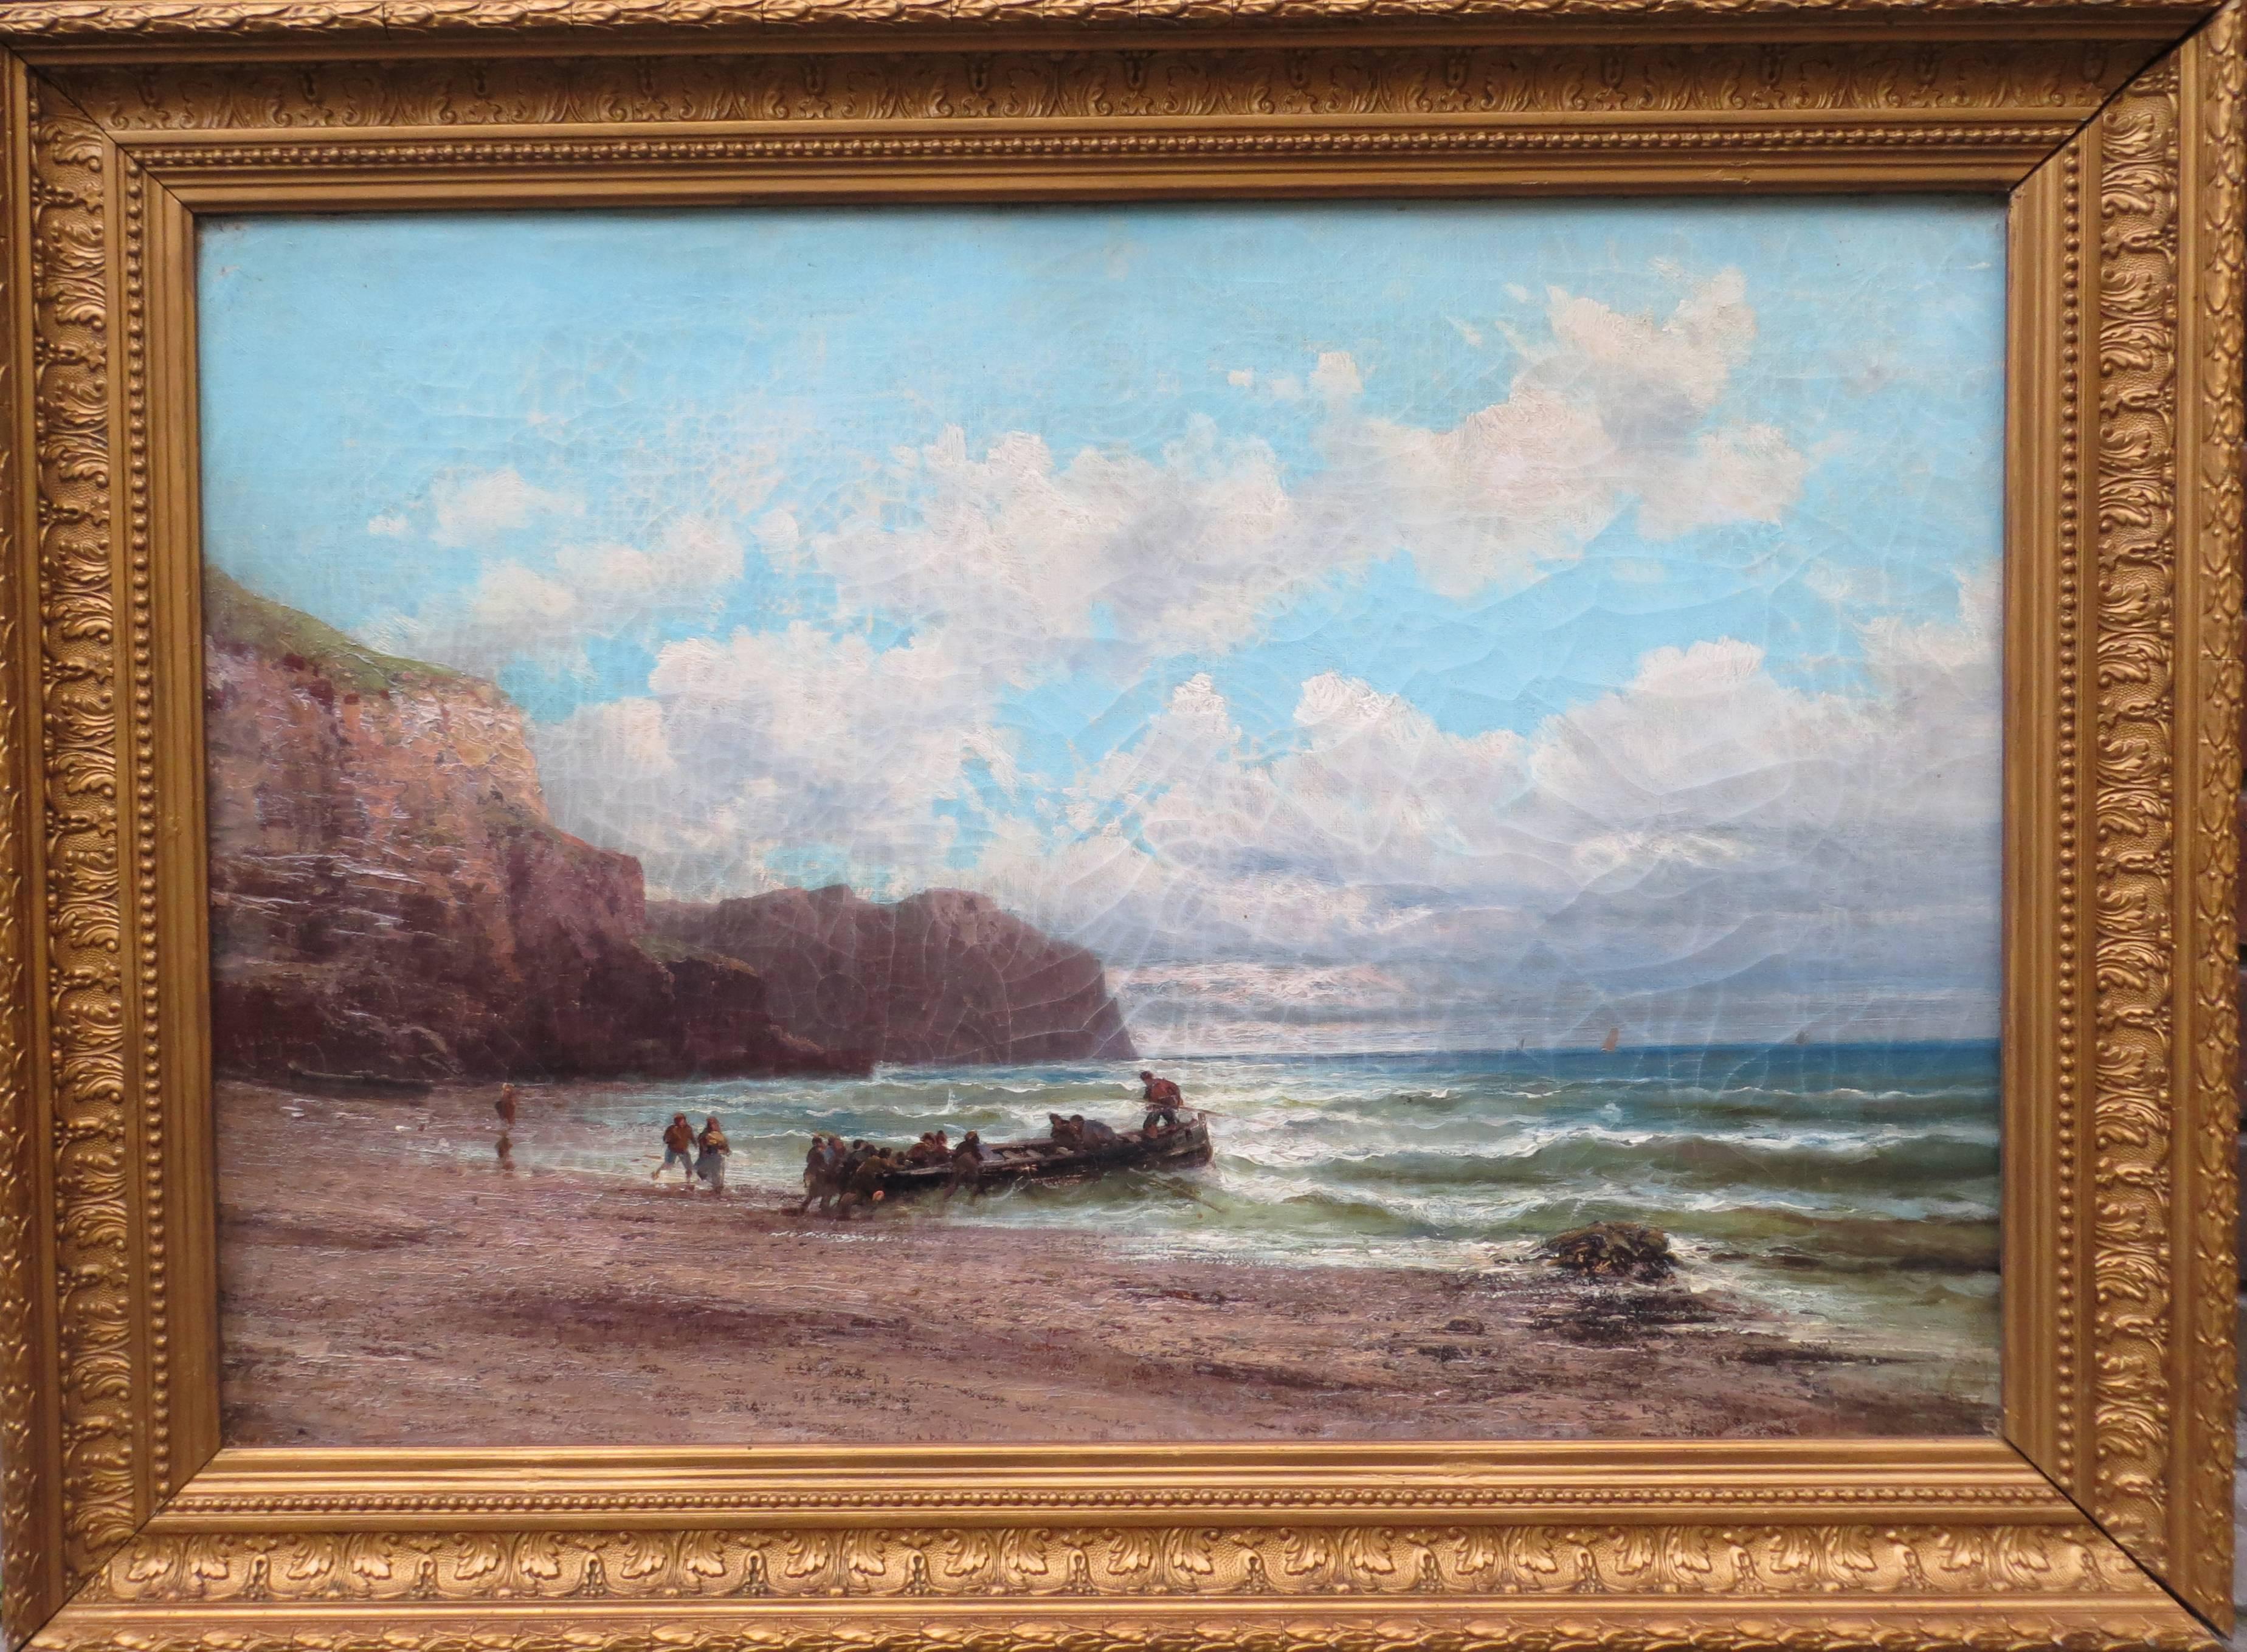 ALFRED EMILE GODCHAUX Figurative Painting - Cliff in Normandy Oil on canvas Framed by Godchaux